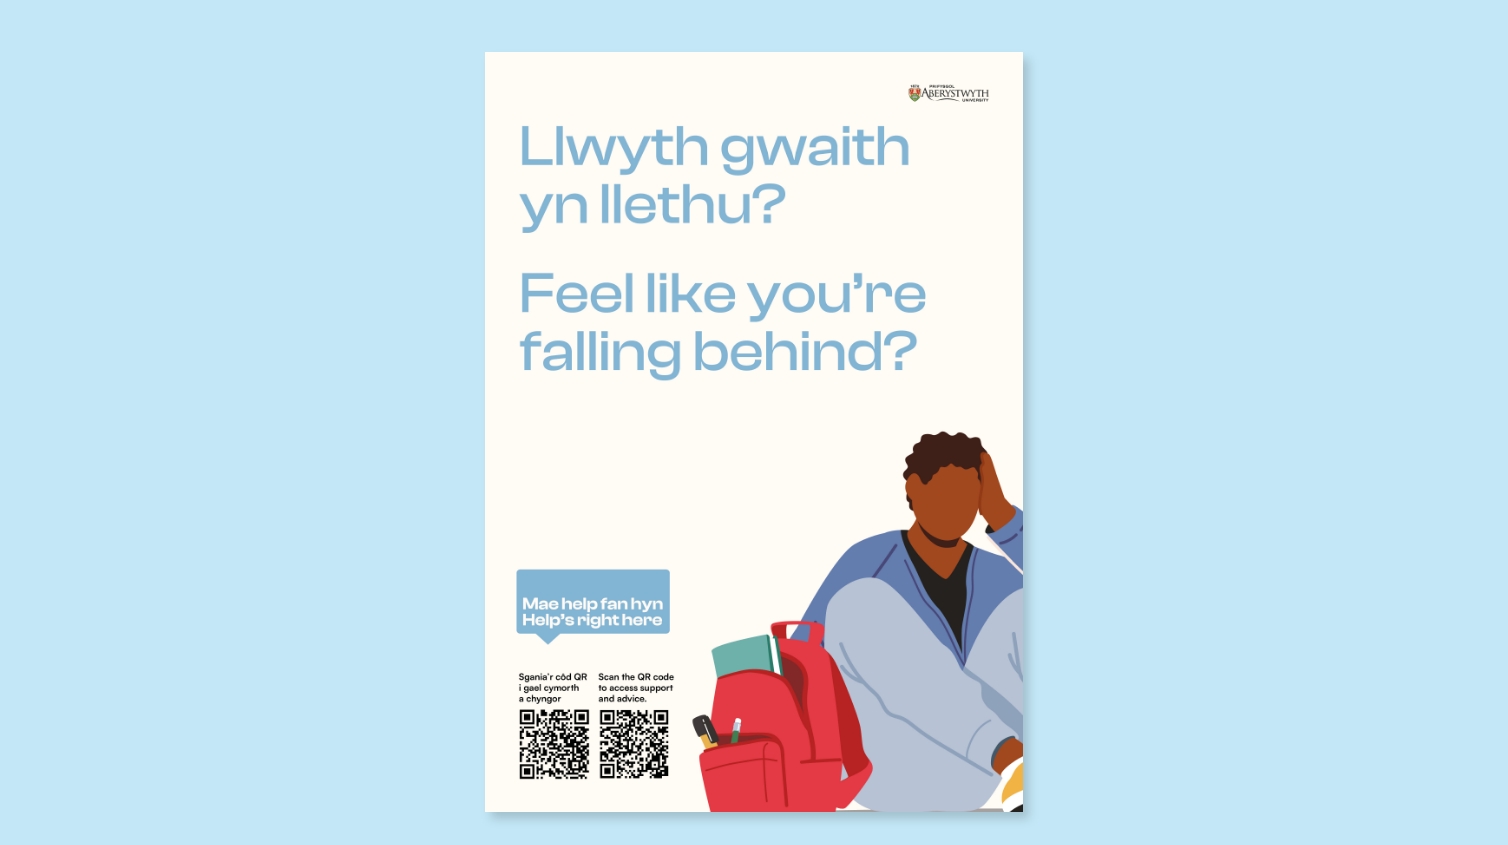 A poster designed by a Brand Agency UK, featuring a person sitting at a desk with a backpack and a hand resting on their head, with text 